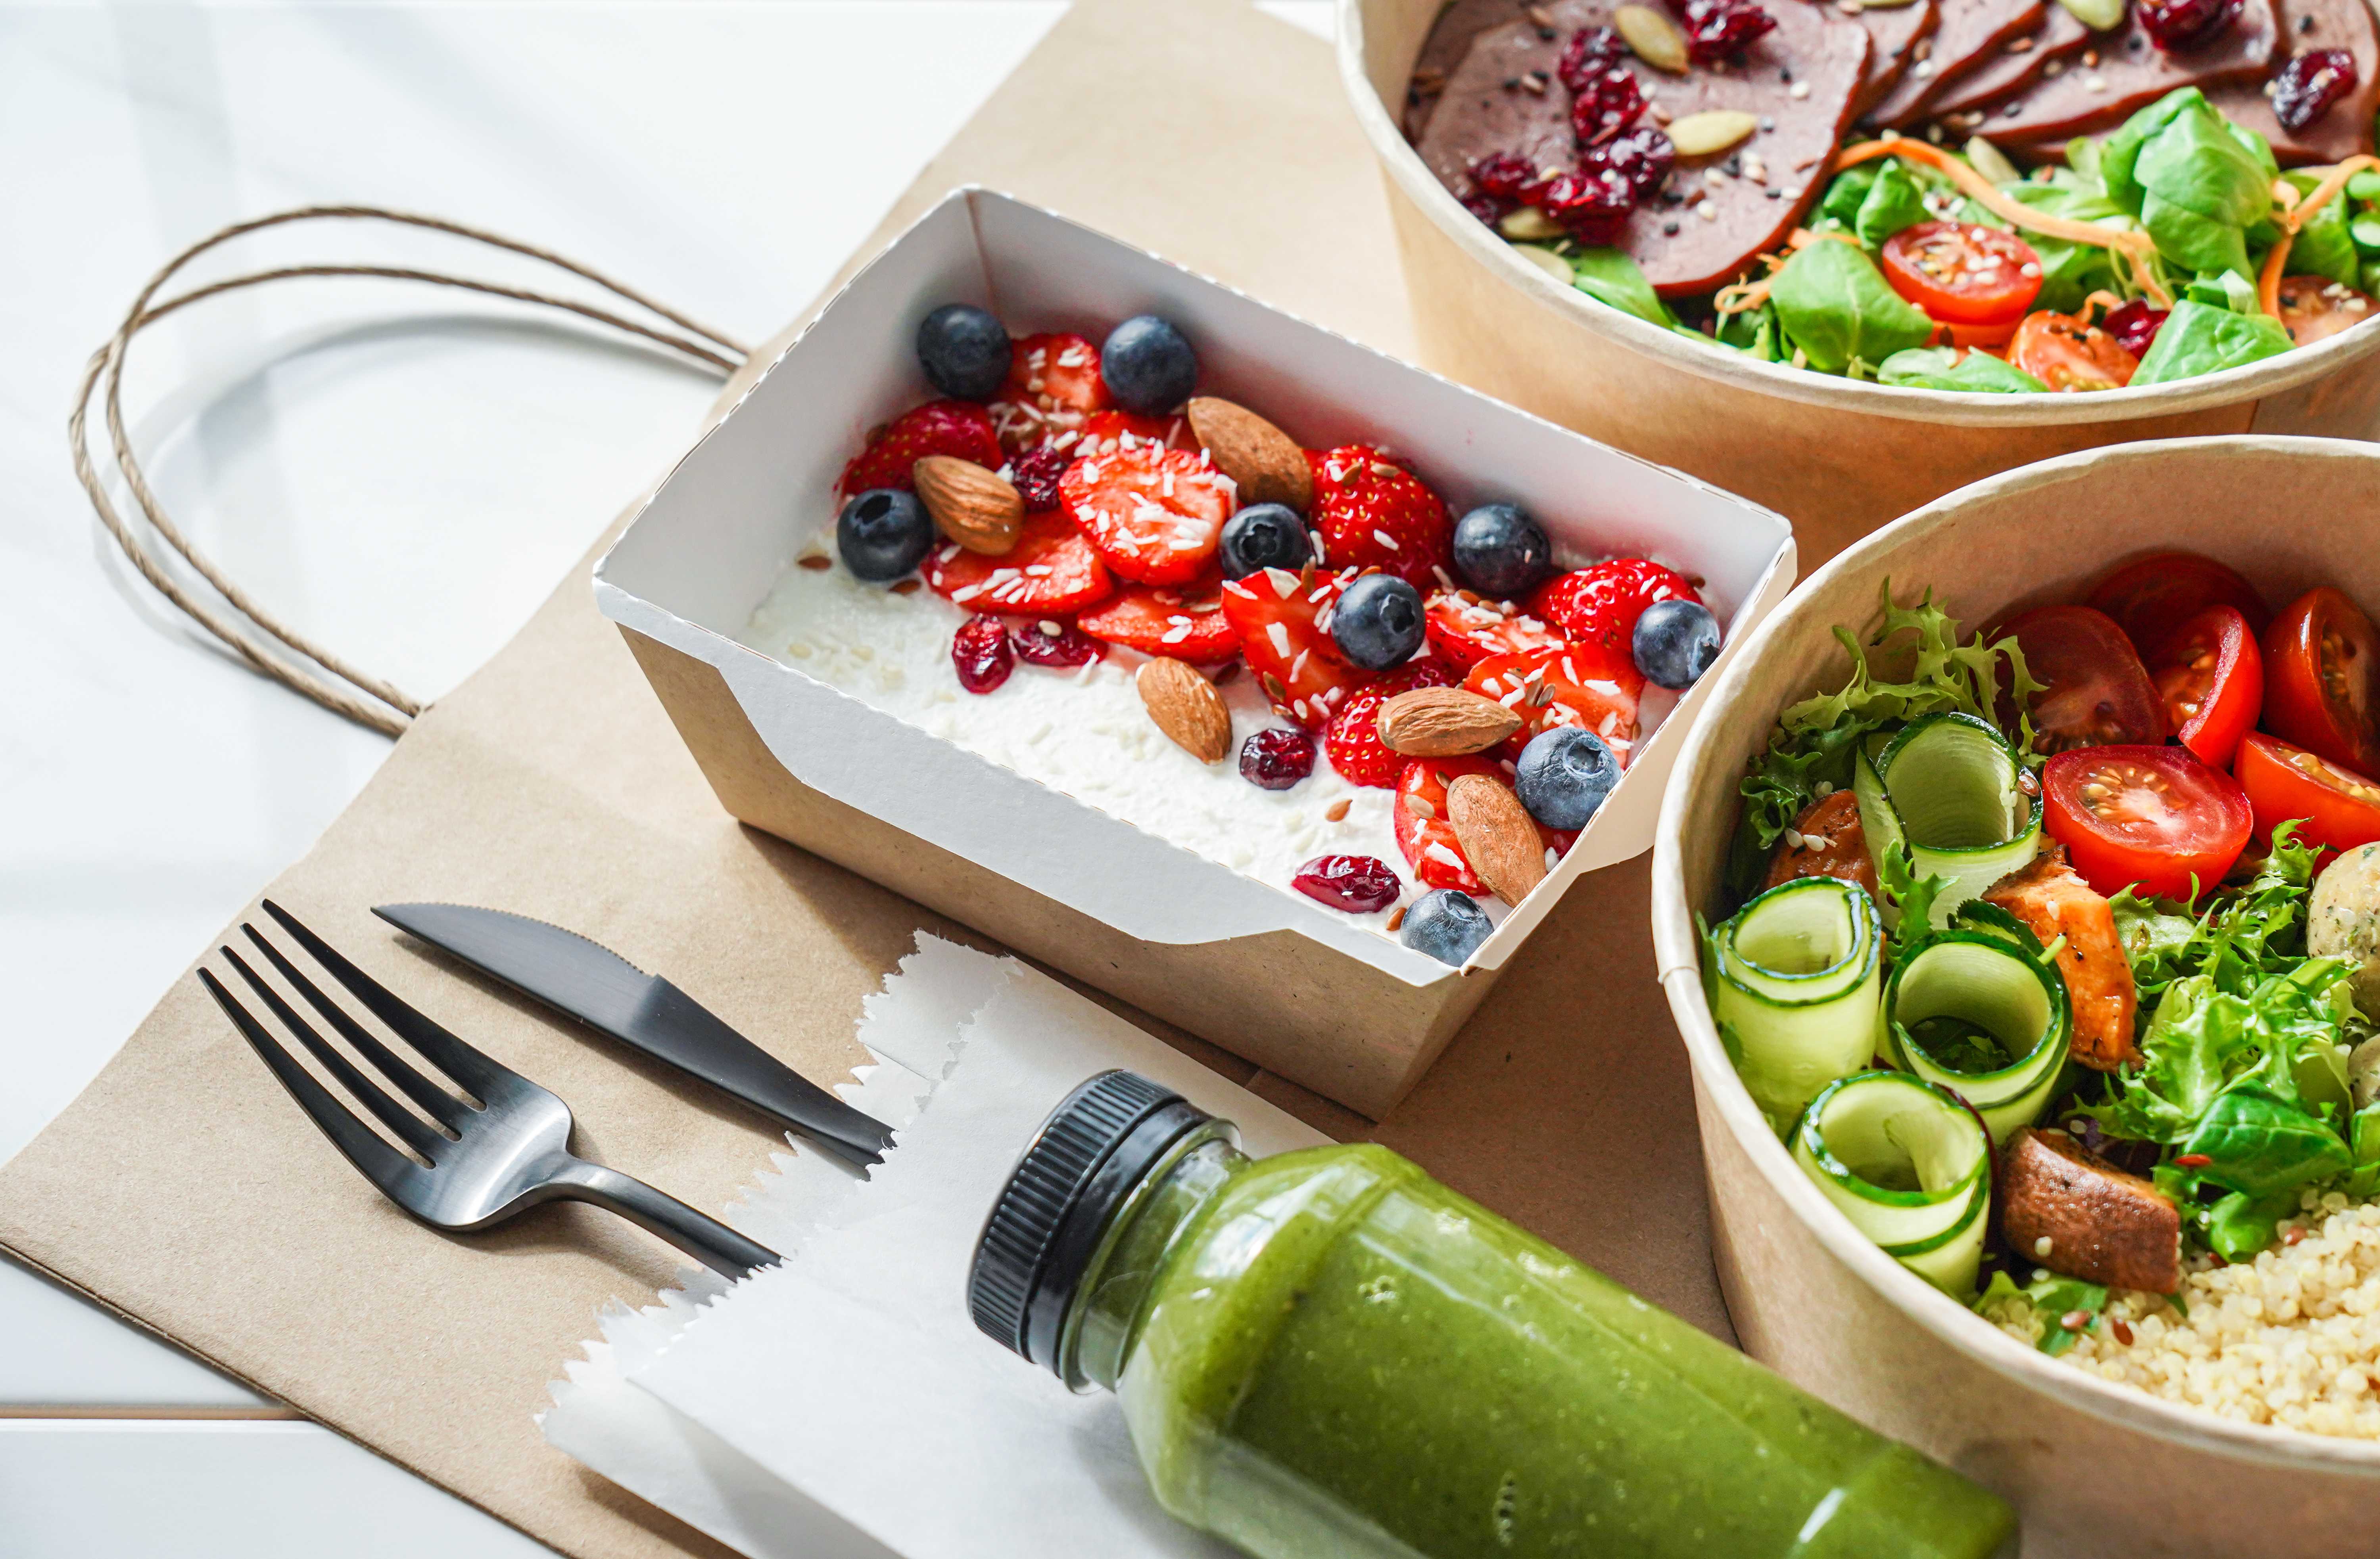 Refreshing takeout food; yogurt, grain bowl, salad, and green juice. Disposable takeout containers, utensils, and paper bag.